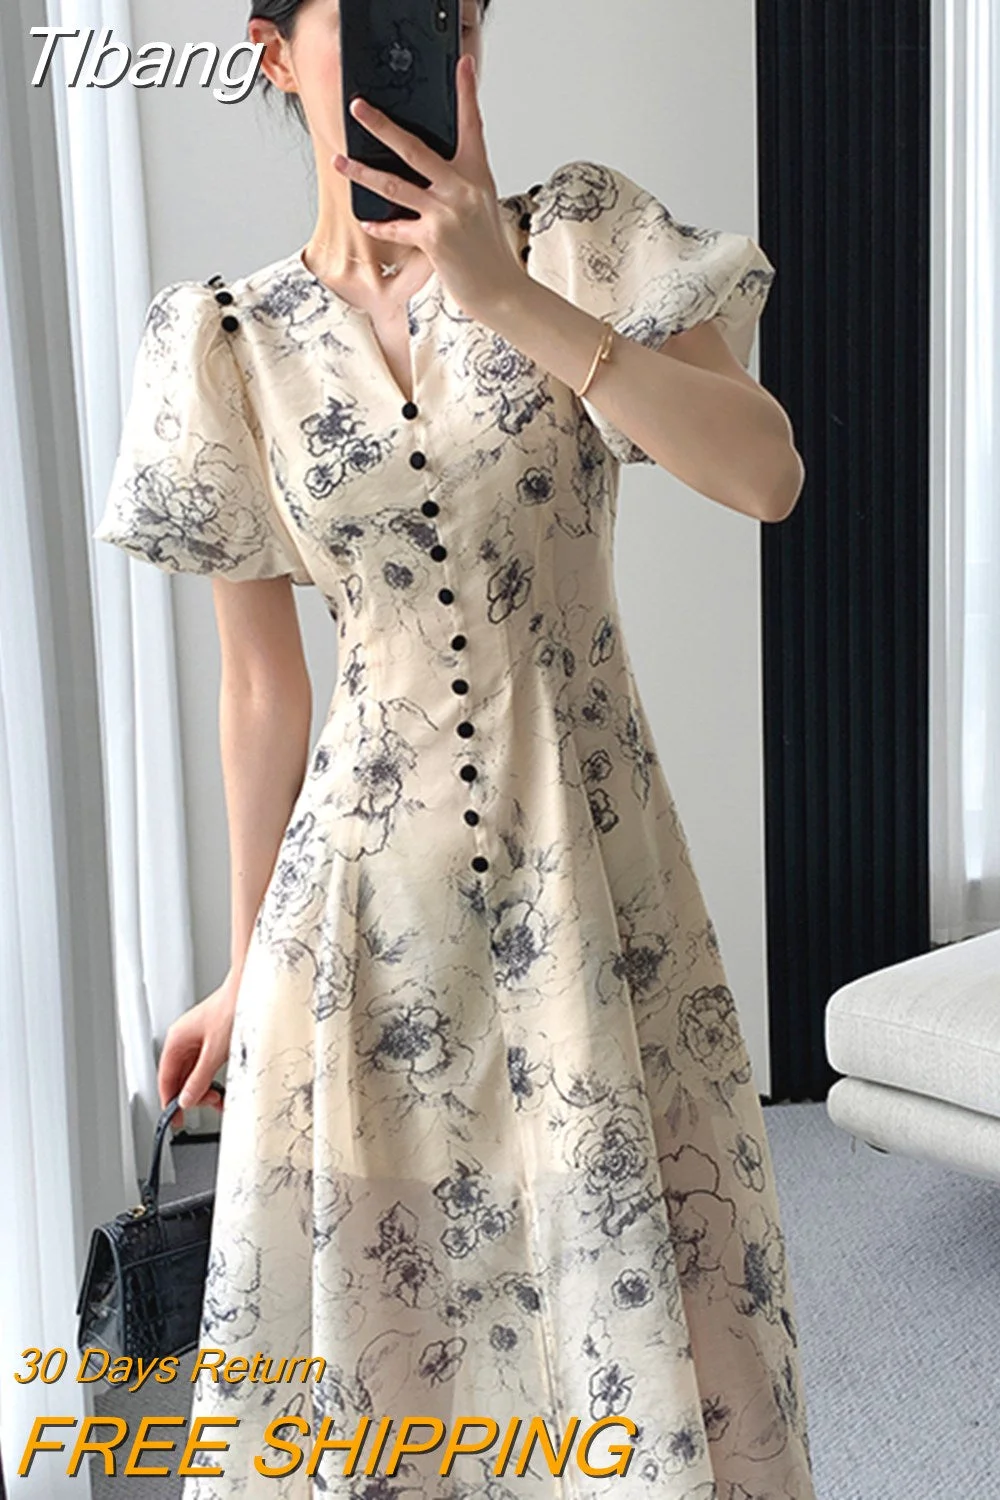 Tlbang Women's Elegant Casual Floral Print Mid-length Party Dress Office Slim Retro A-line Prom Beach Fashion Bubble Sleeve Long Dress